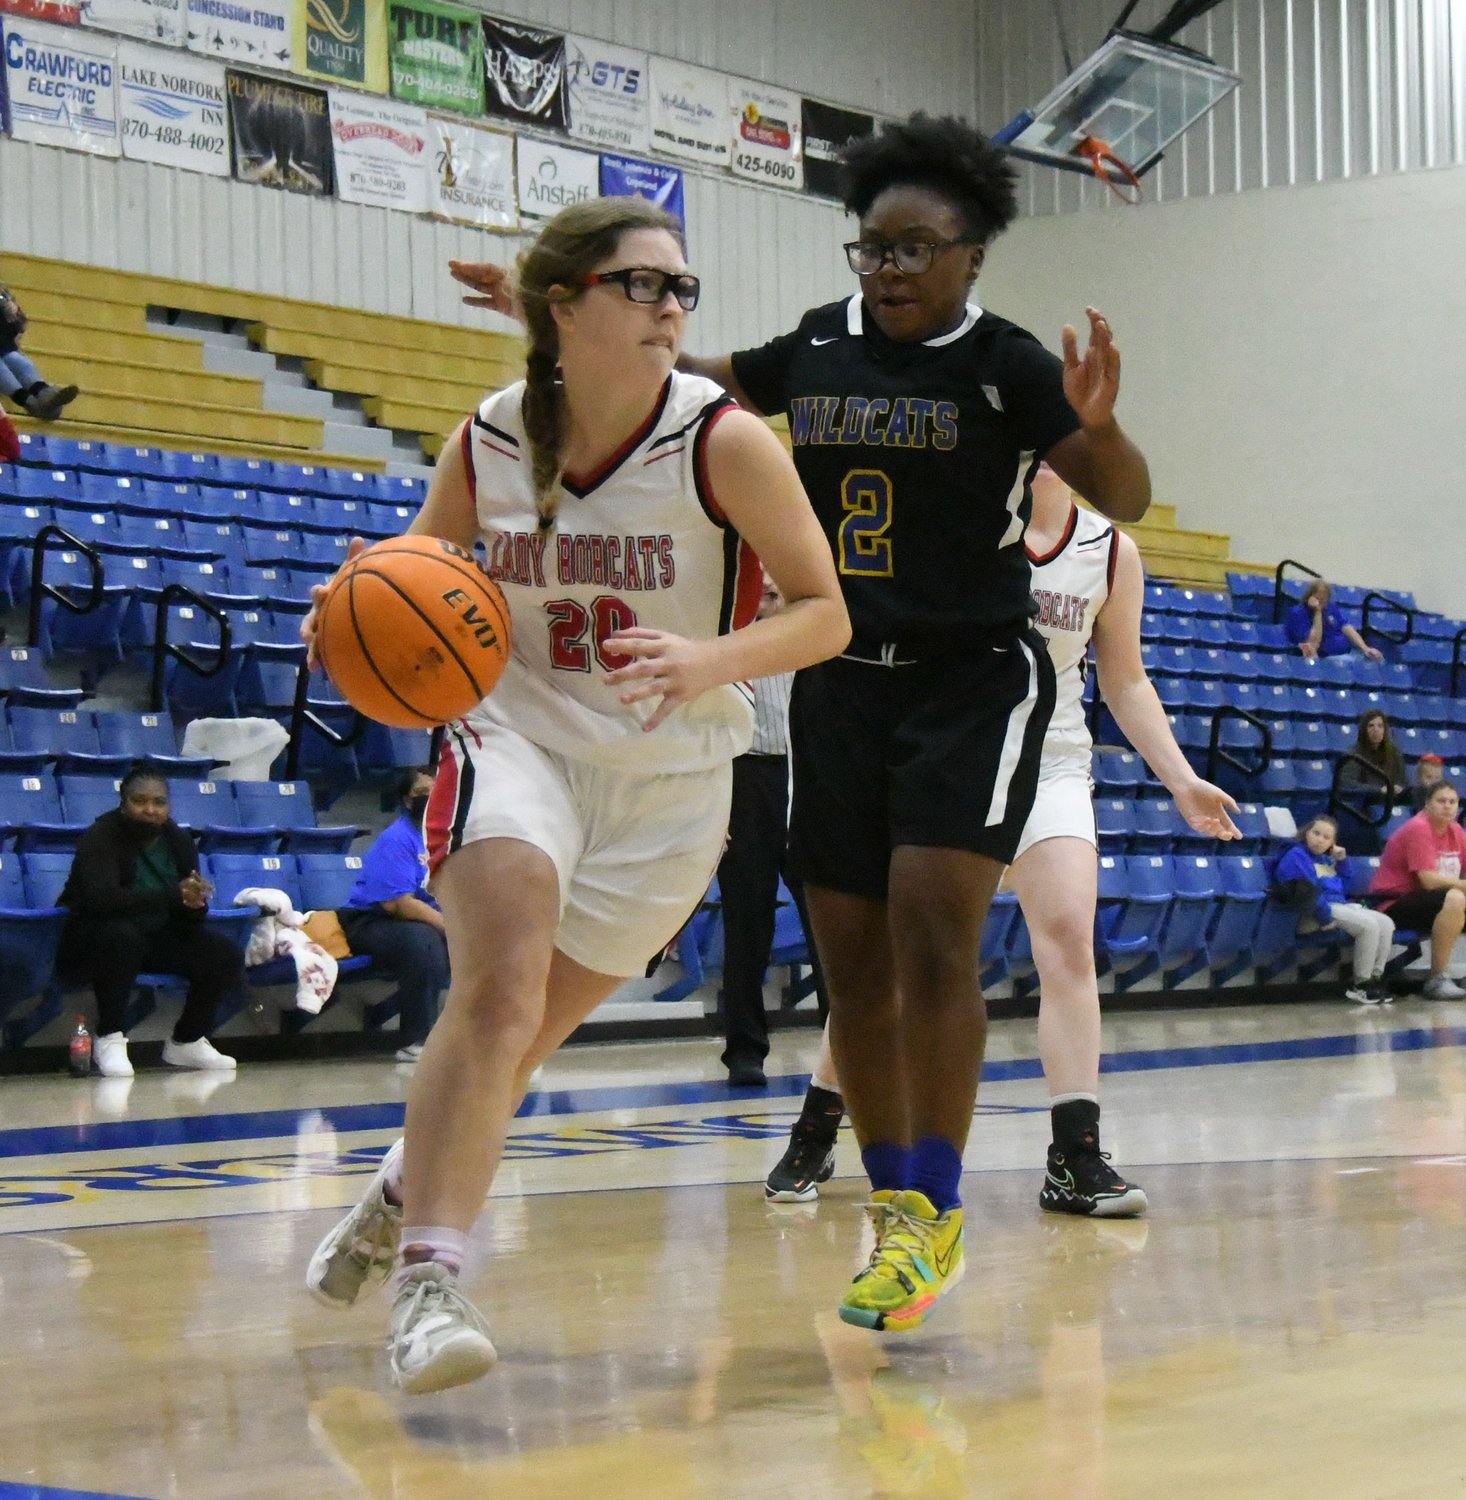 An image from the Flippin-Fayette-Ware senior girls game played Wednesday in the Ultimate Auto Group Invitational at The Hangar.